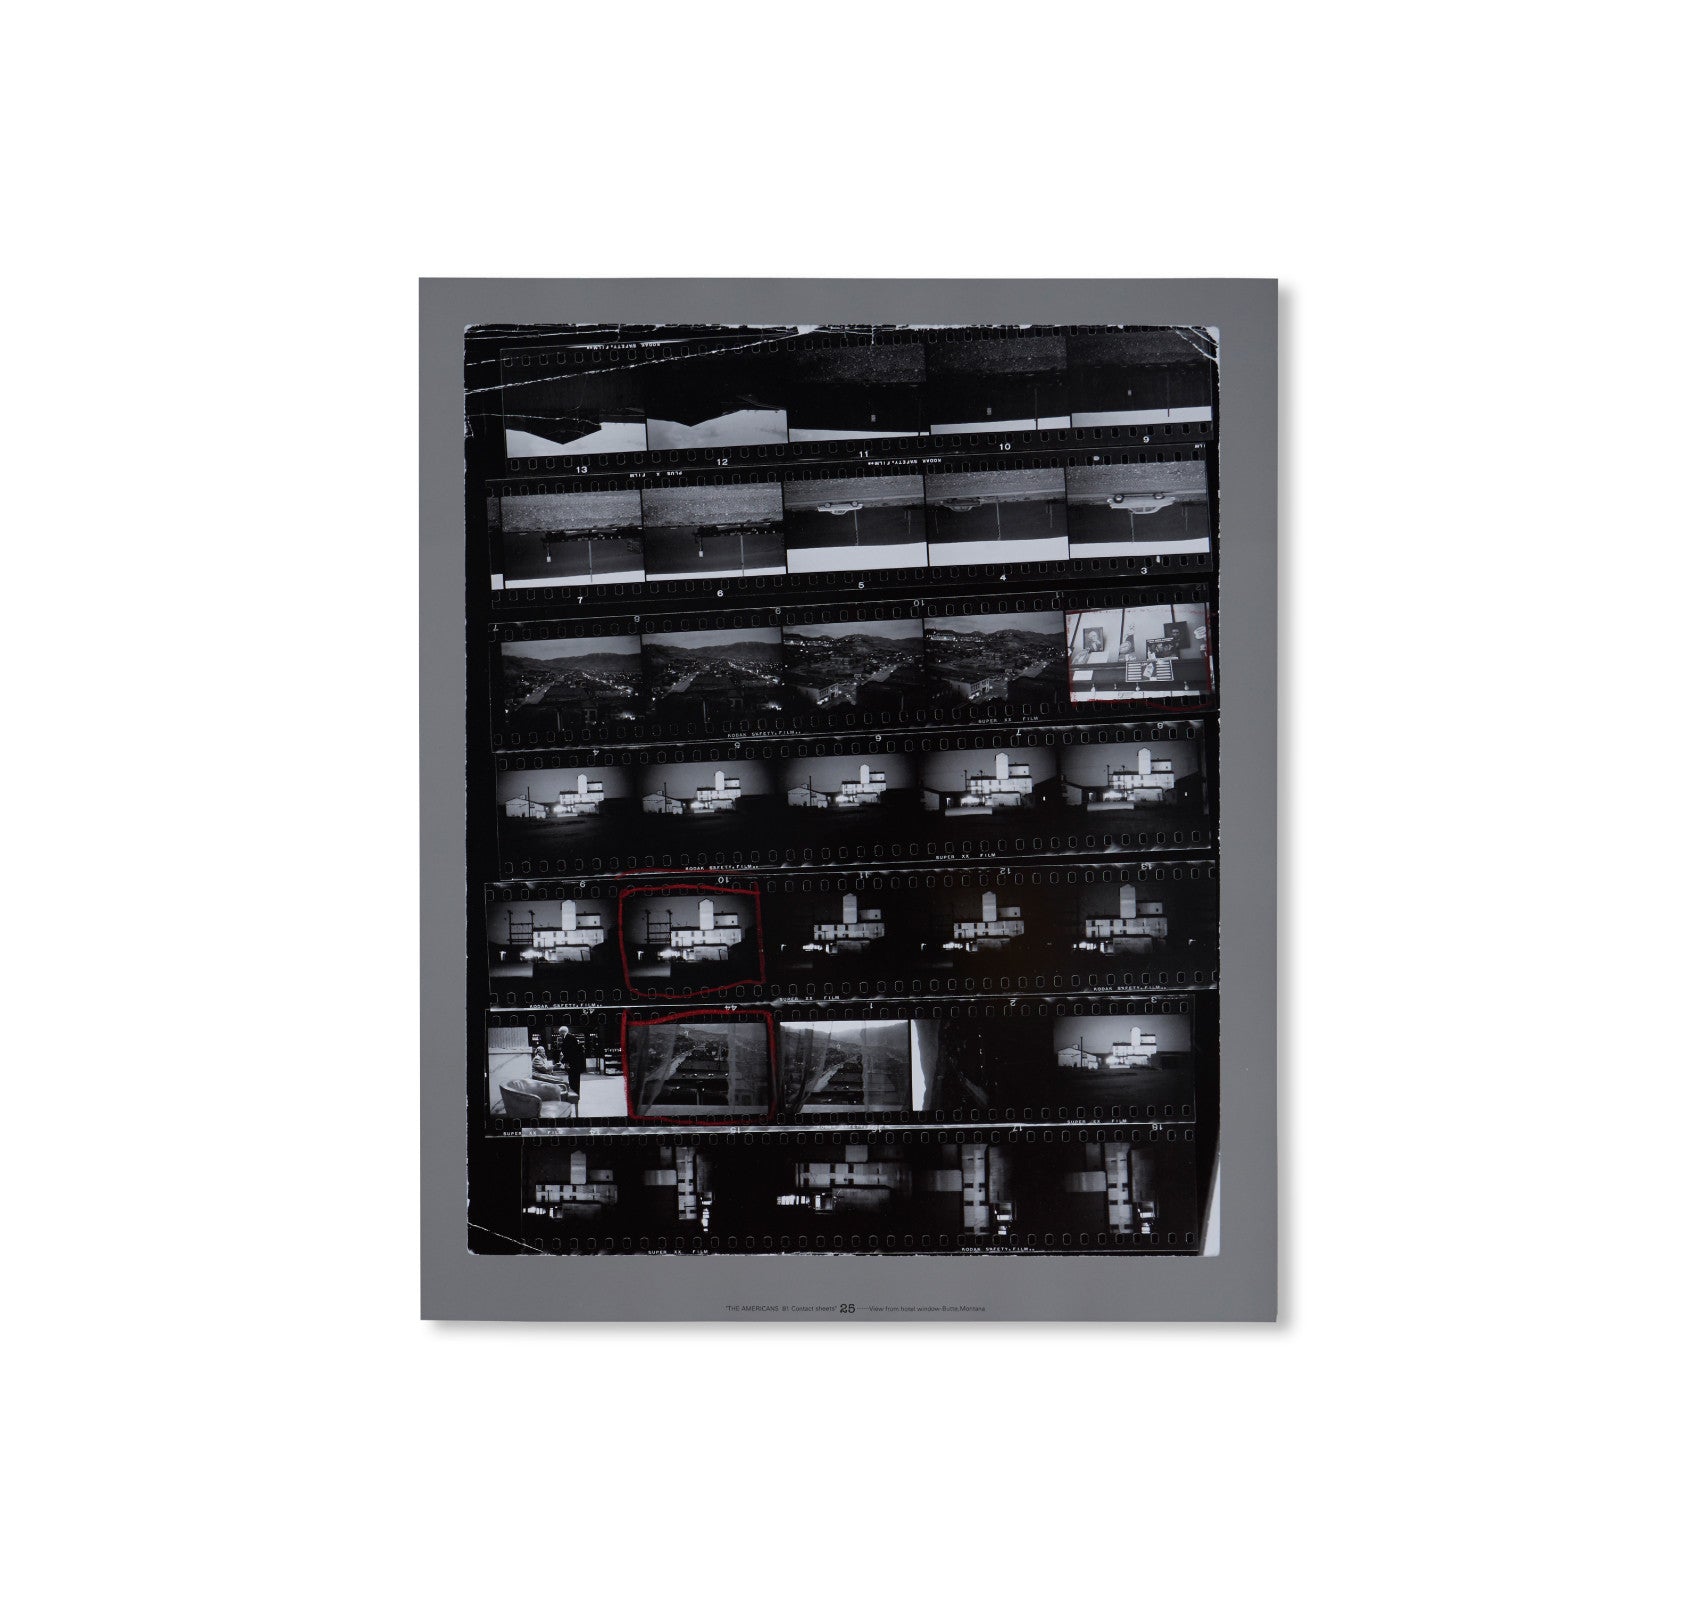 THE AMERICANS, 81 CONTACT SHEETS (FOLDING BOARD BOX) by Robert Frank